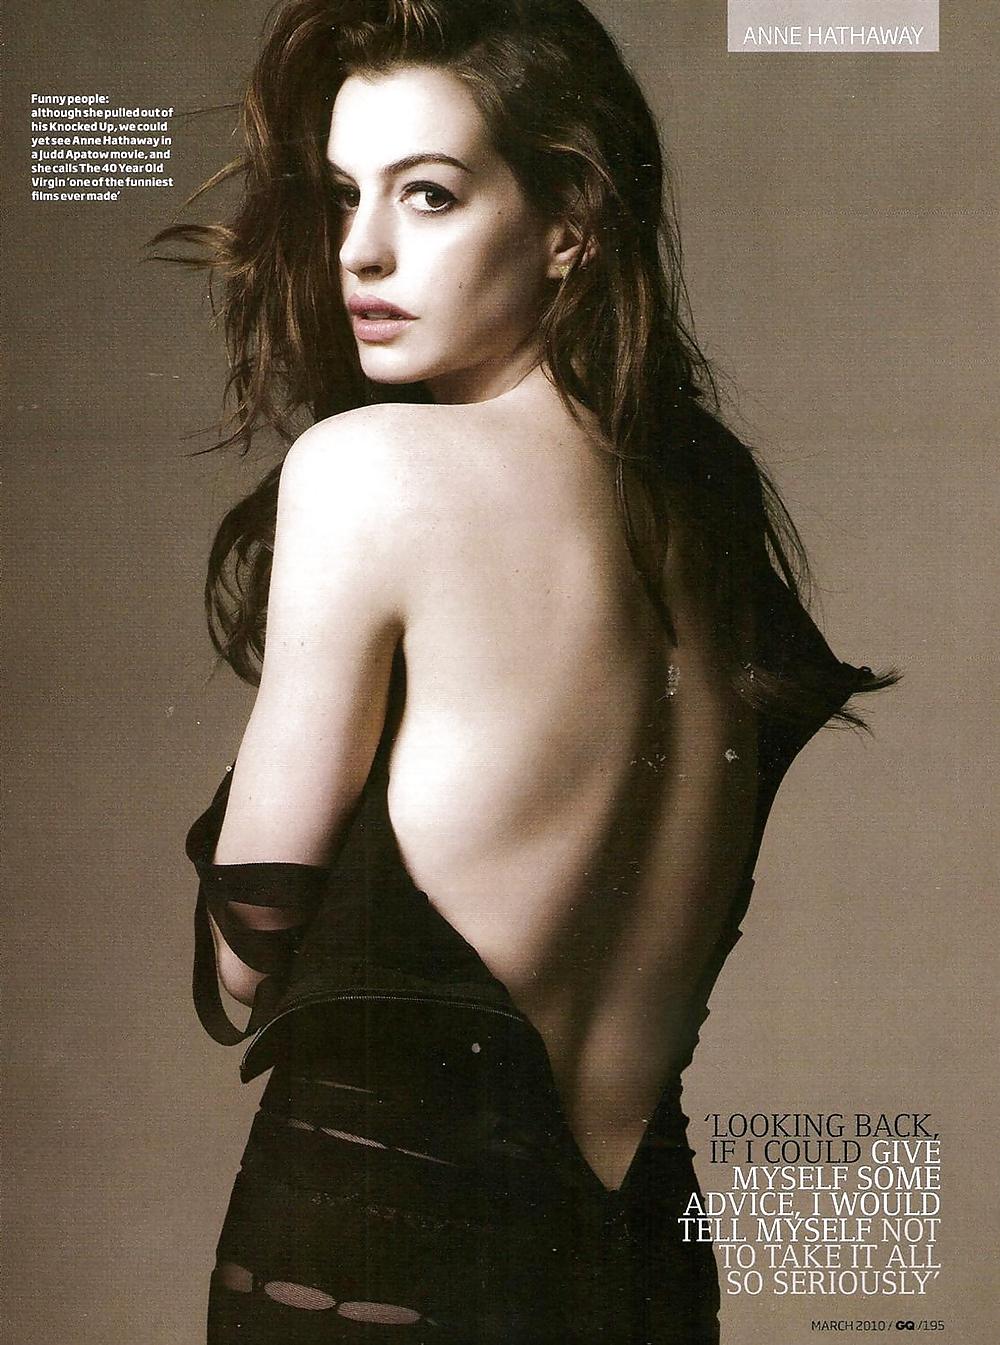 Anne Hathaway mega collection 1 #2463366